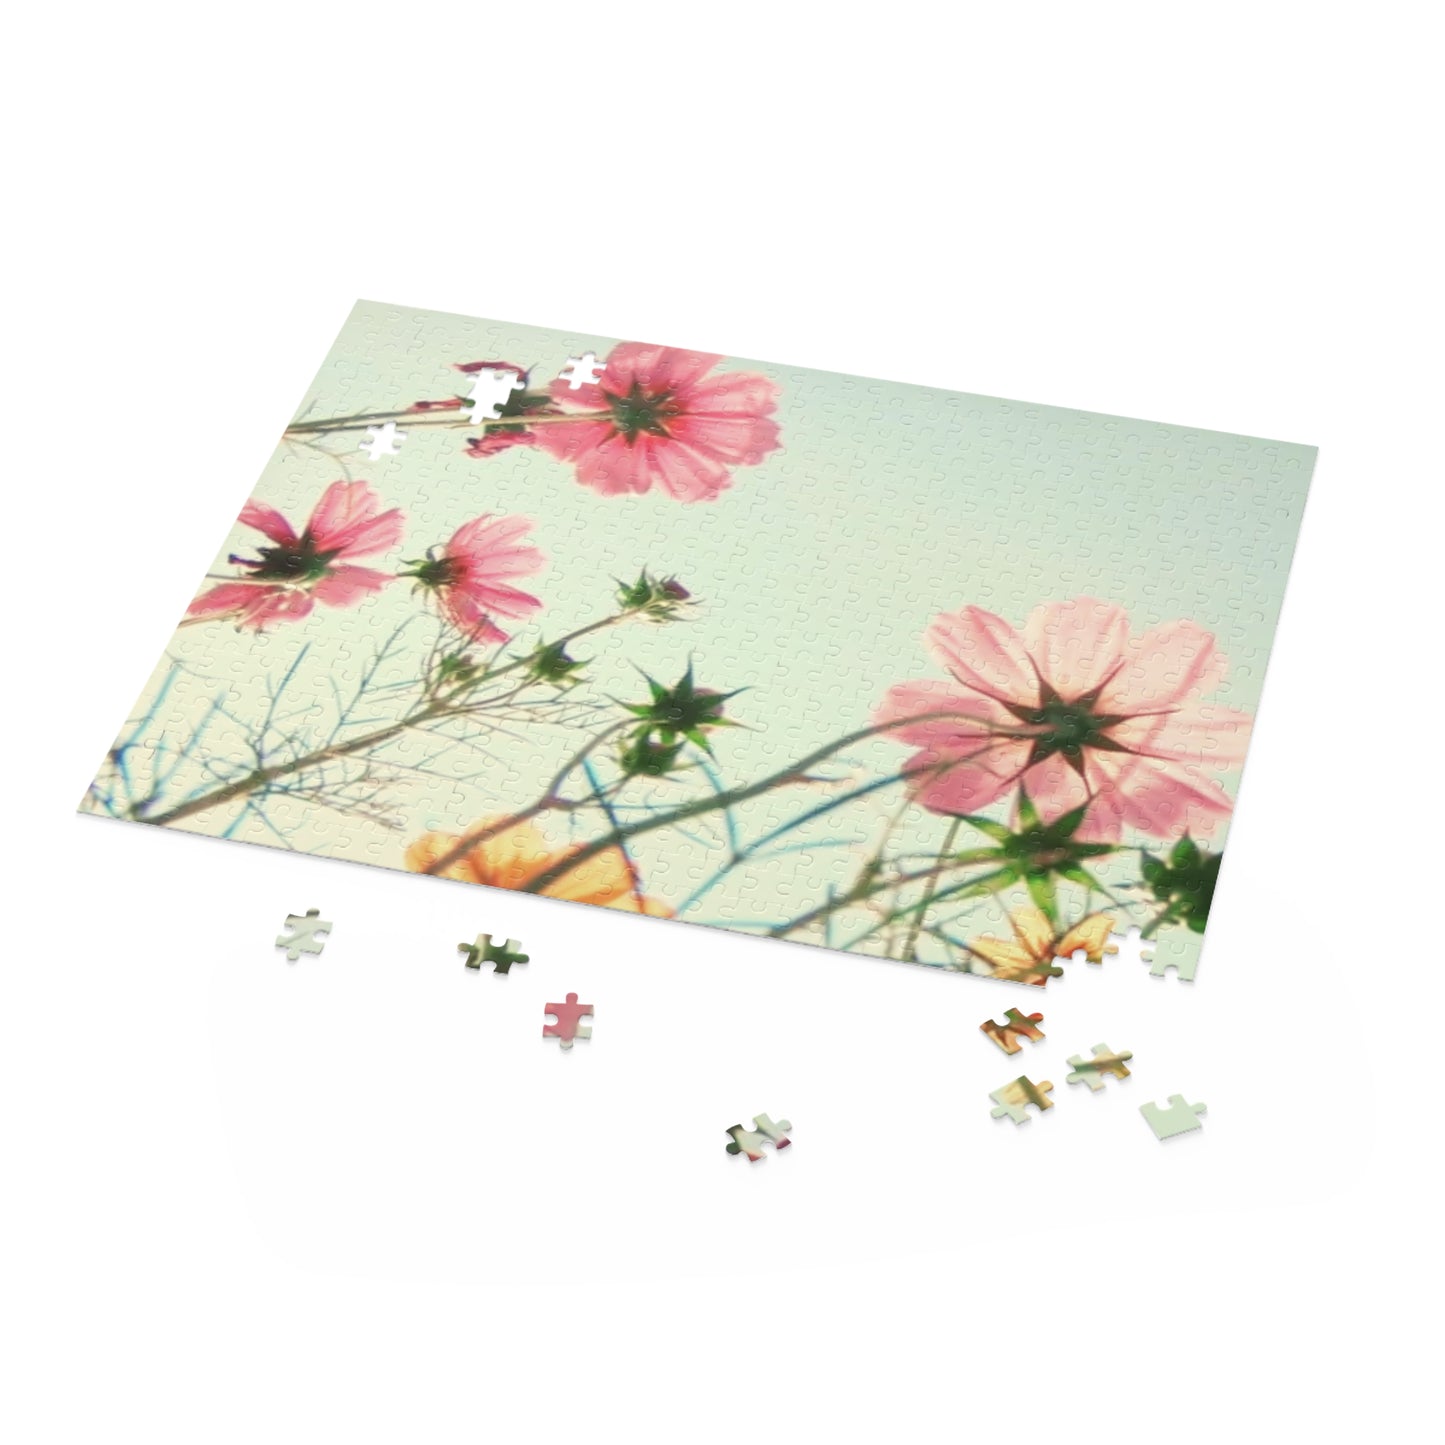 Flowers In The Field Jigsaw Puzzle 500-Piece